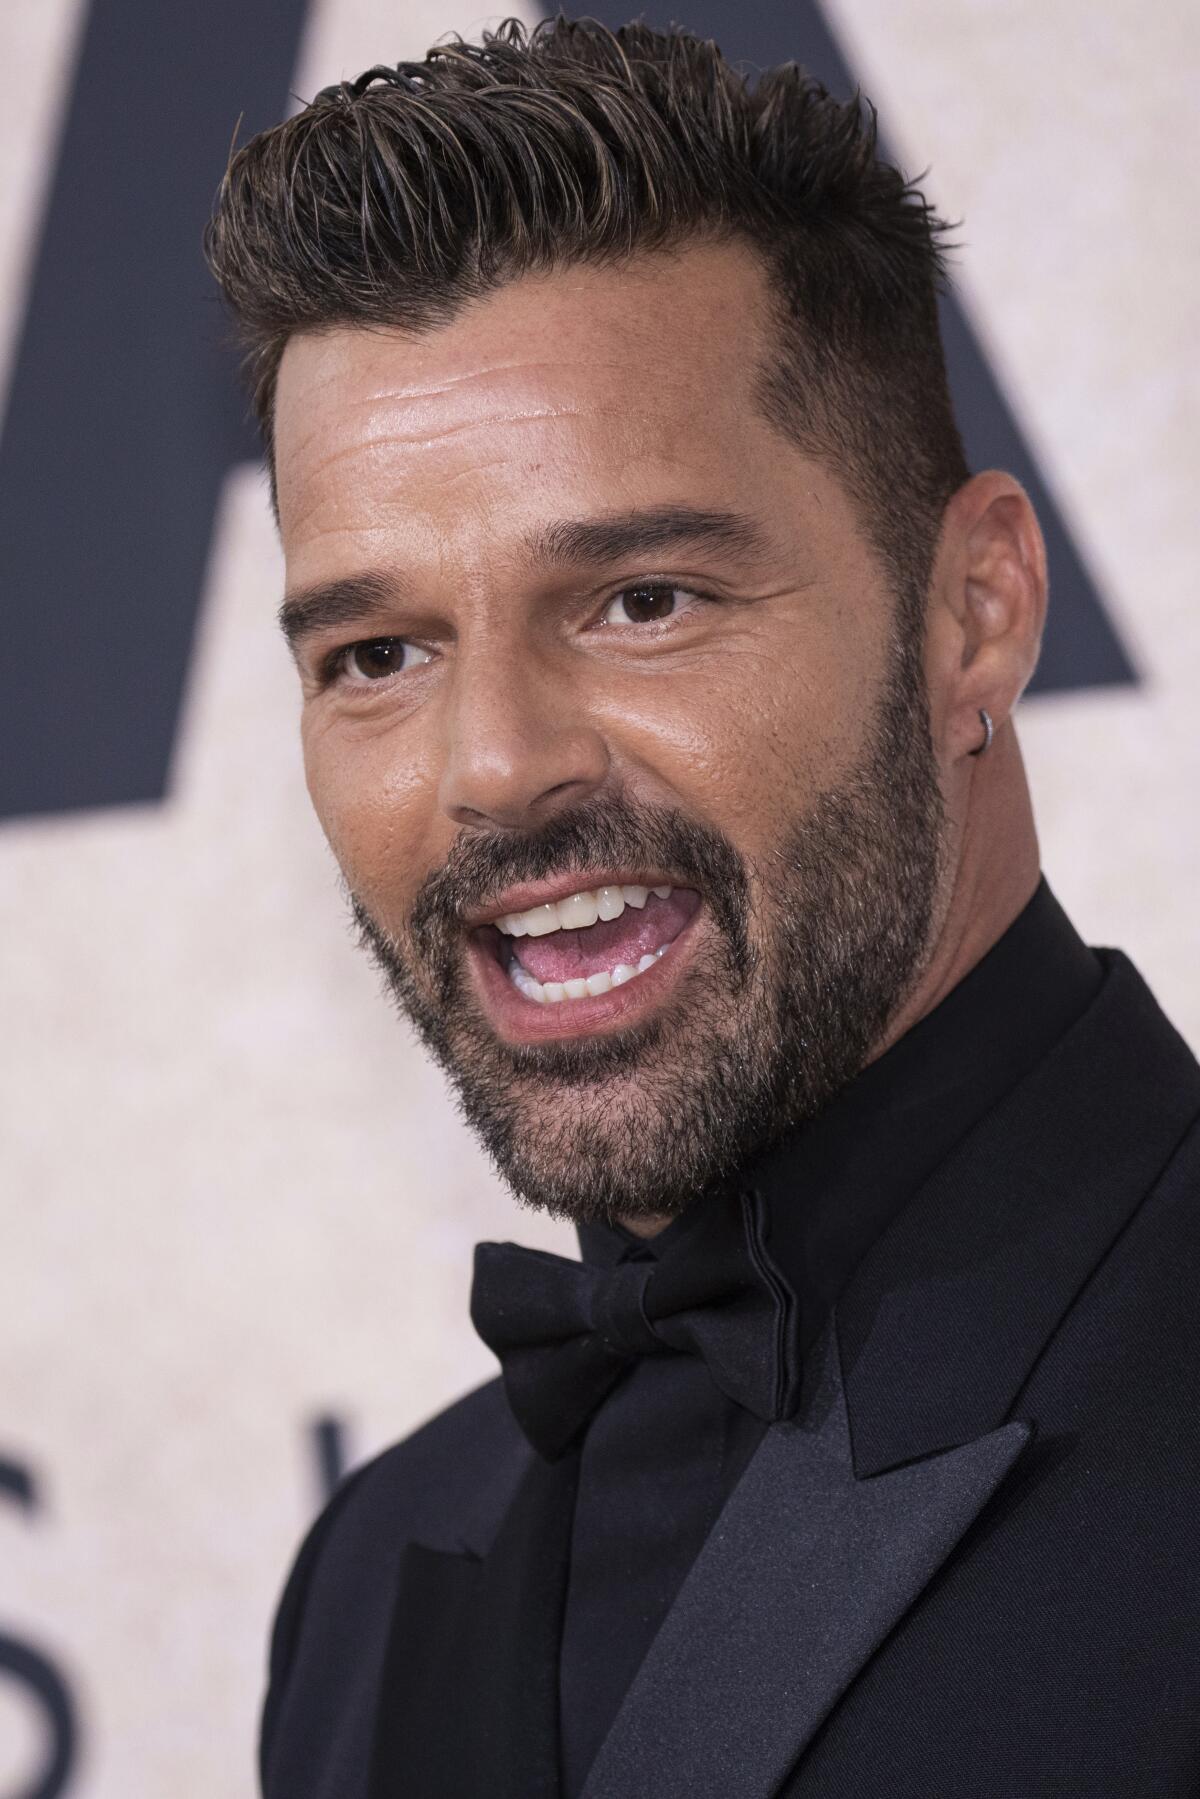 Ricky Martin poses and smiles wearing a black tuxedo, shirt and bow tie